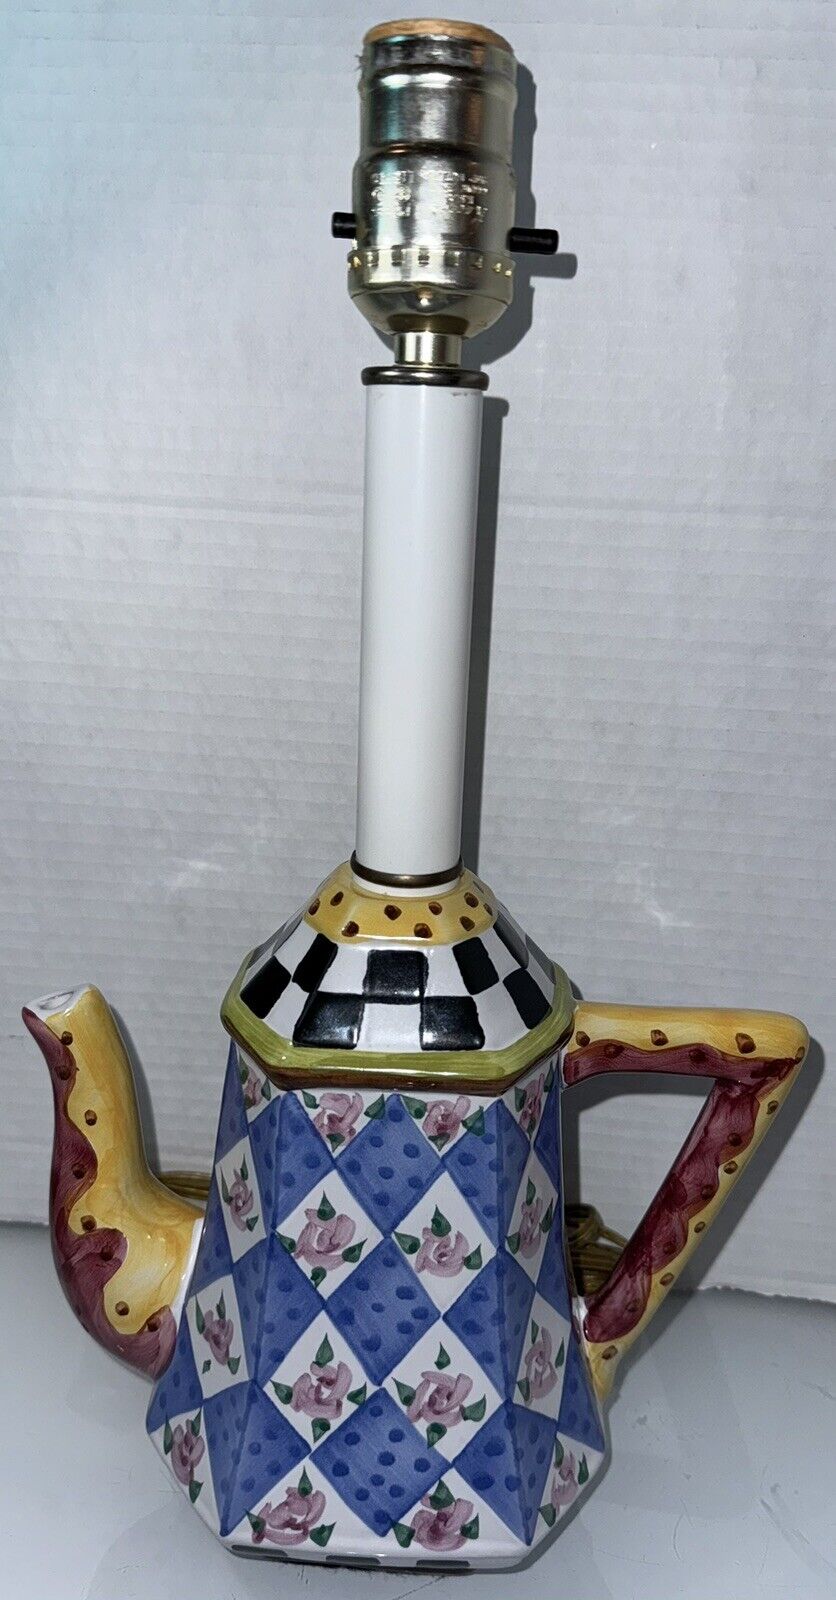 Milson & Louis Hand Painted Checkered Teapot Lamp Whimsical